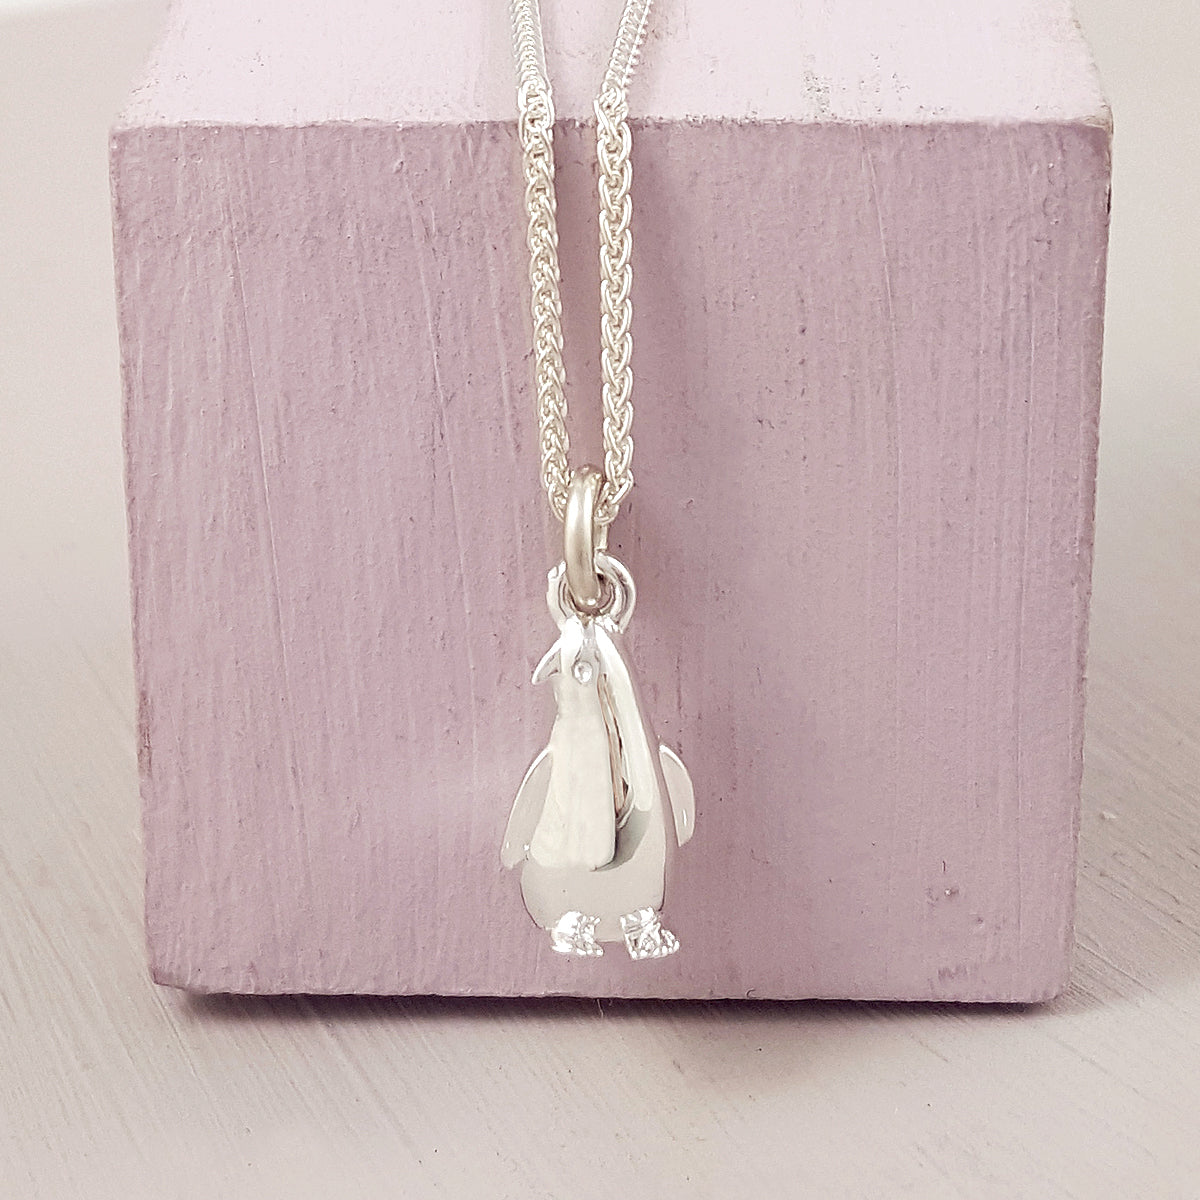 Silver Penguin Bracelet Charm Necklace with perfect detail free UK delivery